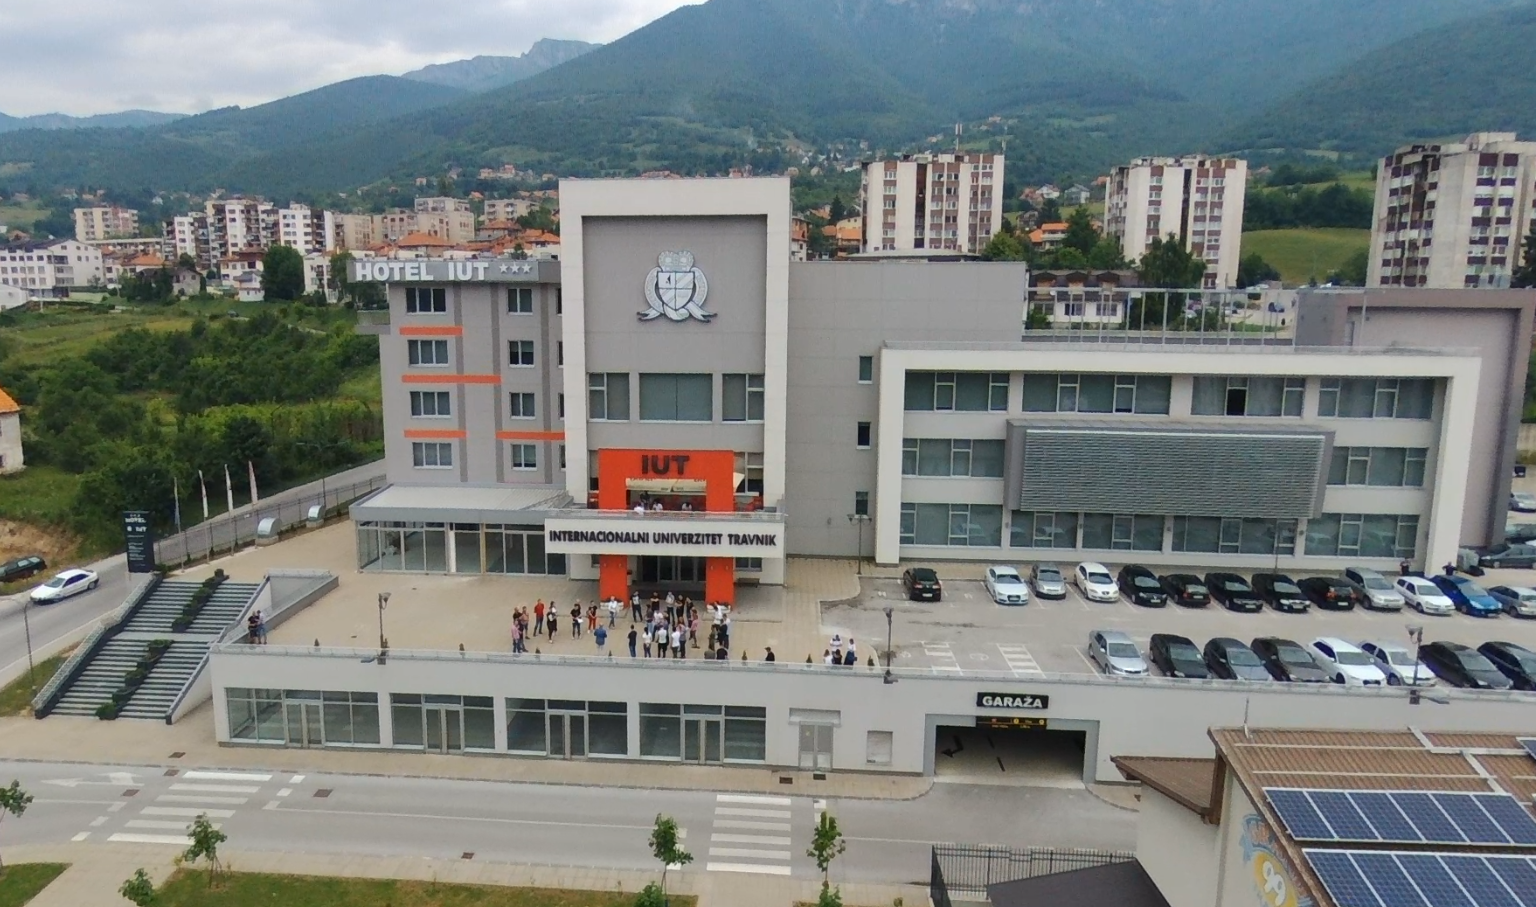 Theoretical And Practical Classes In The Classrooms At The International University Travnik Have Been Suspended